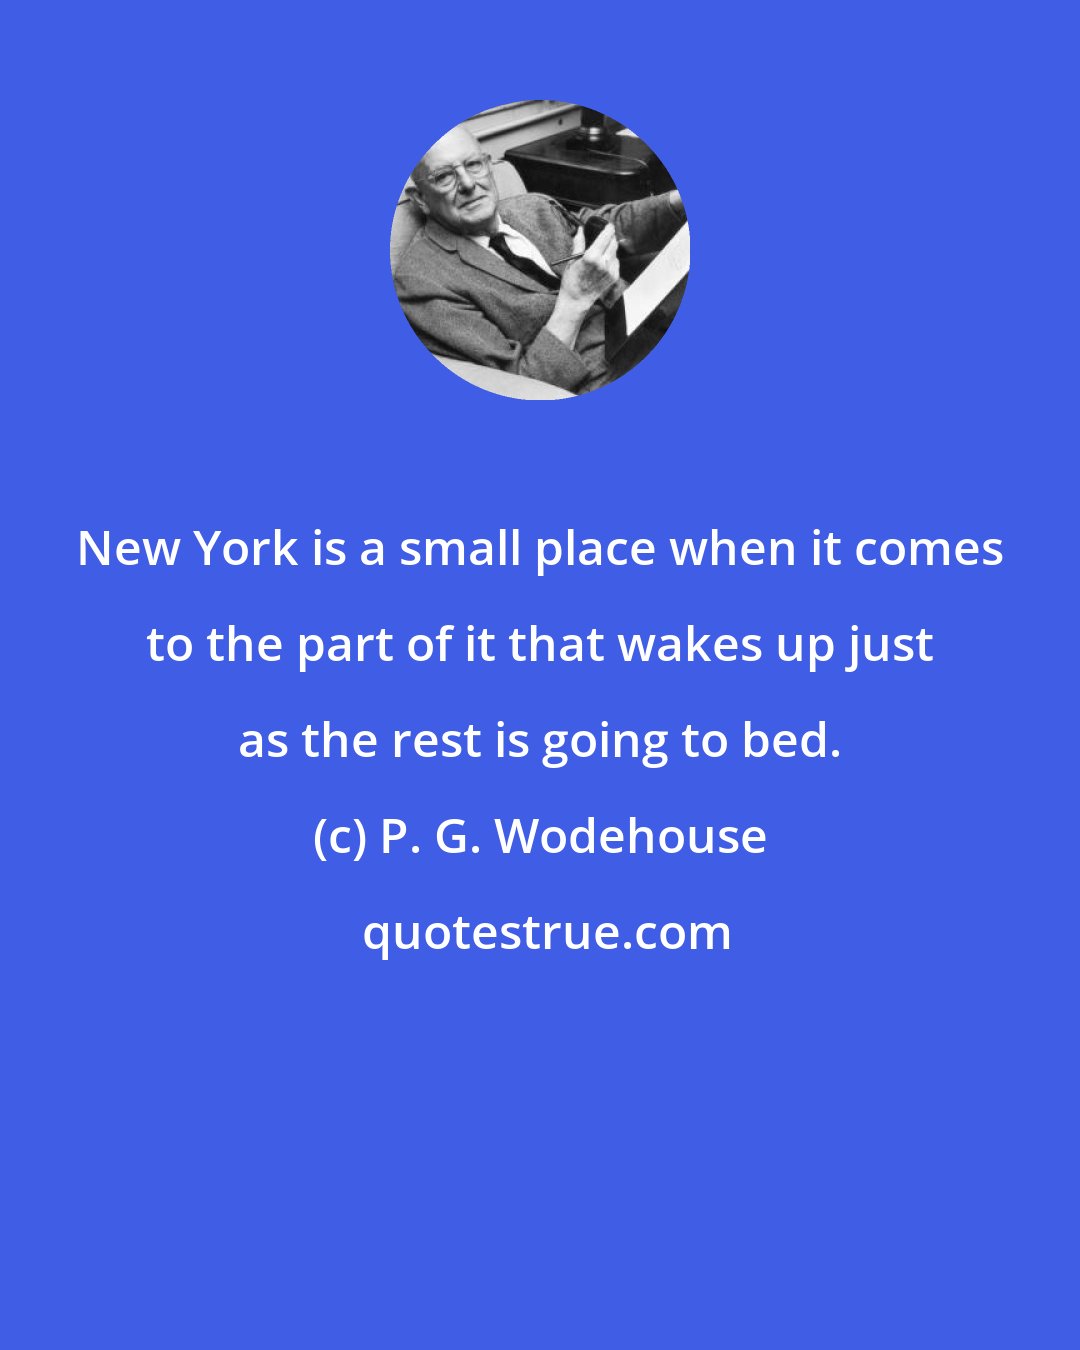 P. G. Wodehouse: New York is a small place when it comes to the part of it that wakes up just as the rest is going to bed.